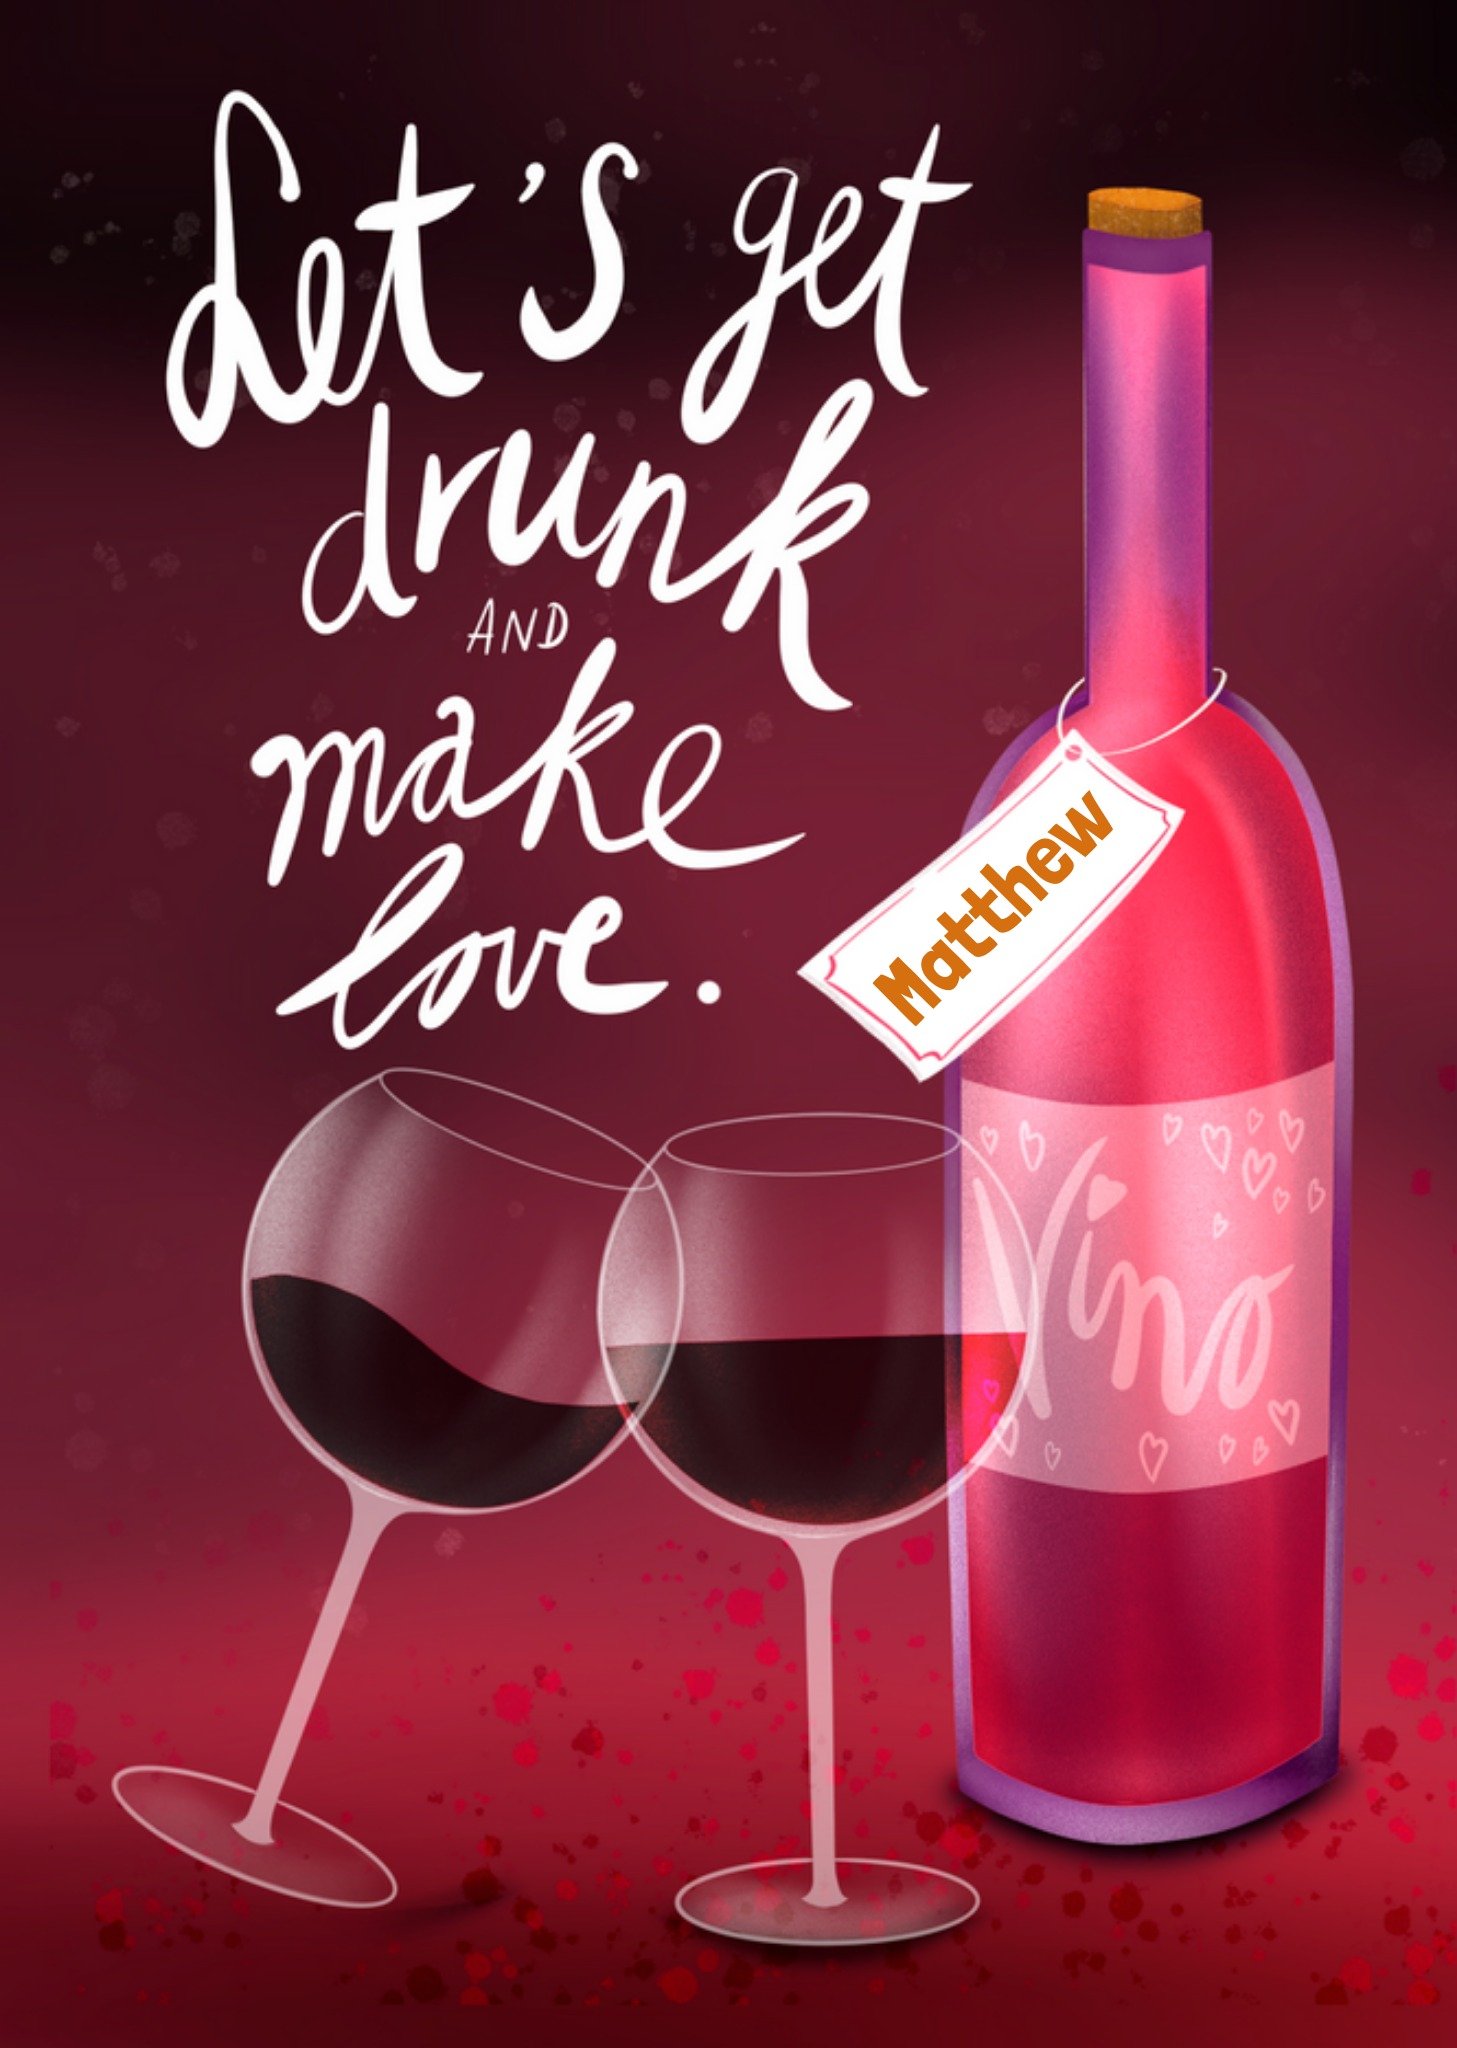 Moonpig Fishuals Let's Get Drunk And Make Love Illustrated Bottle Of Vino And Wine Glasses Typograph